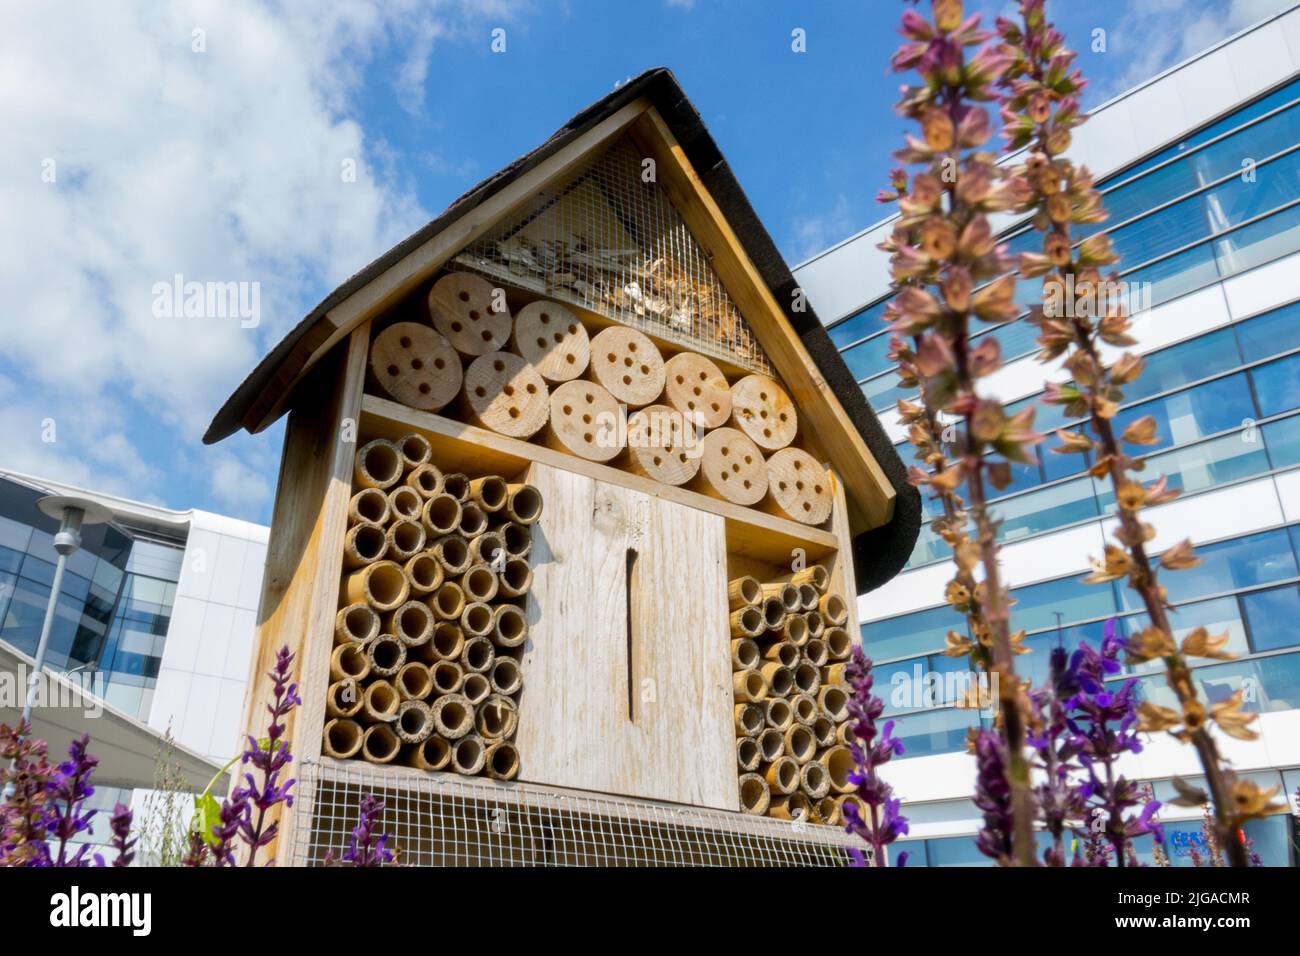 Insect hotel, Bee hotel, Bug hotel, Suburban Refuge House for Environmentally friendly Insects, Urban, Beneficial insects Stock Photo